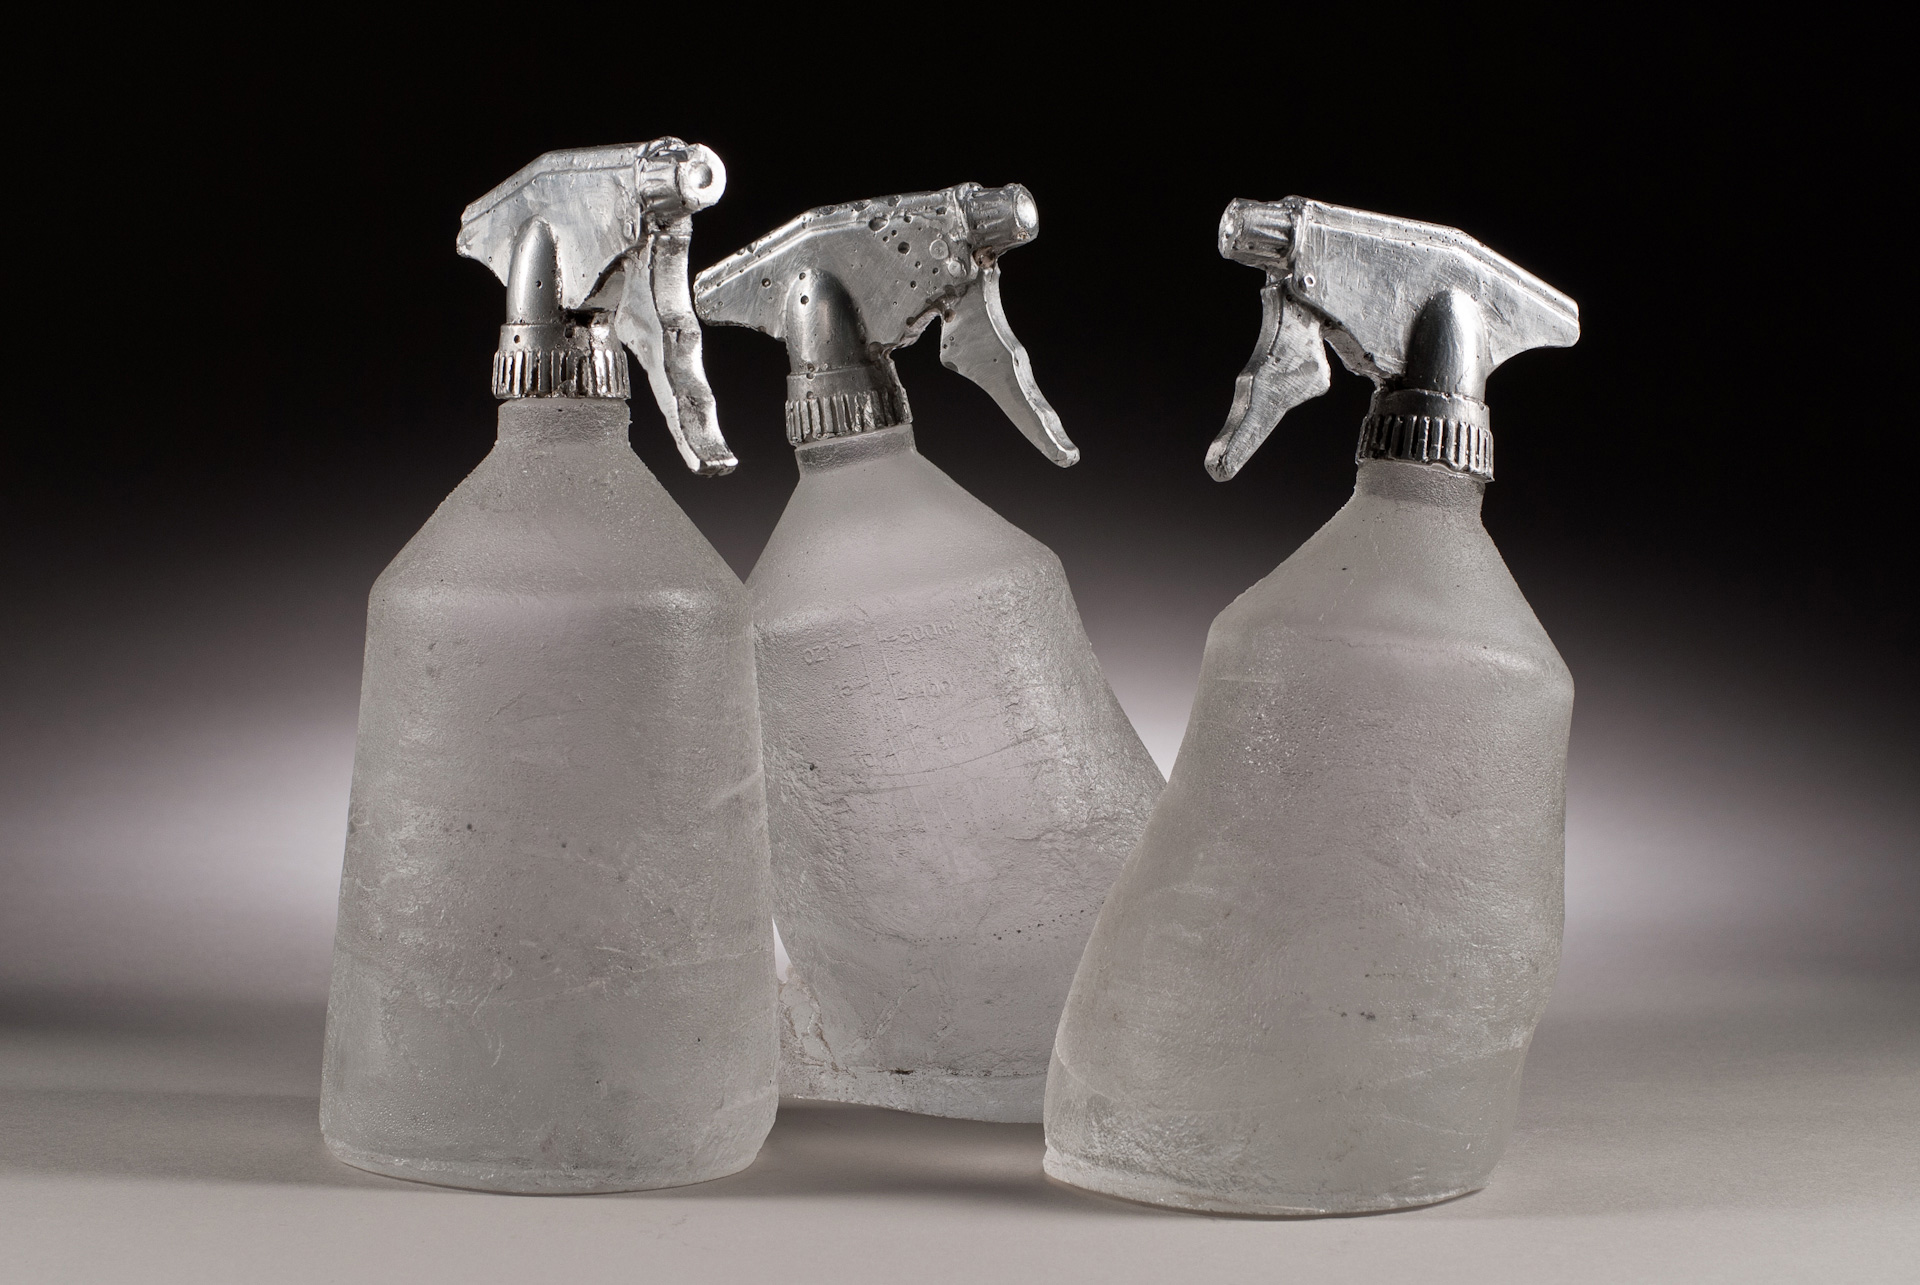 Three cast glass bottles , titled Spray Morped, with printed labels and cast aluminum sprayer nozzles. 